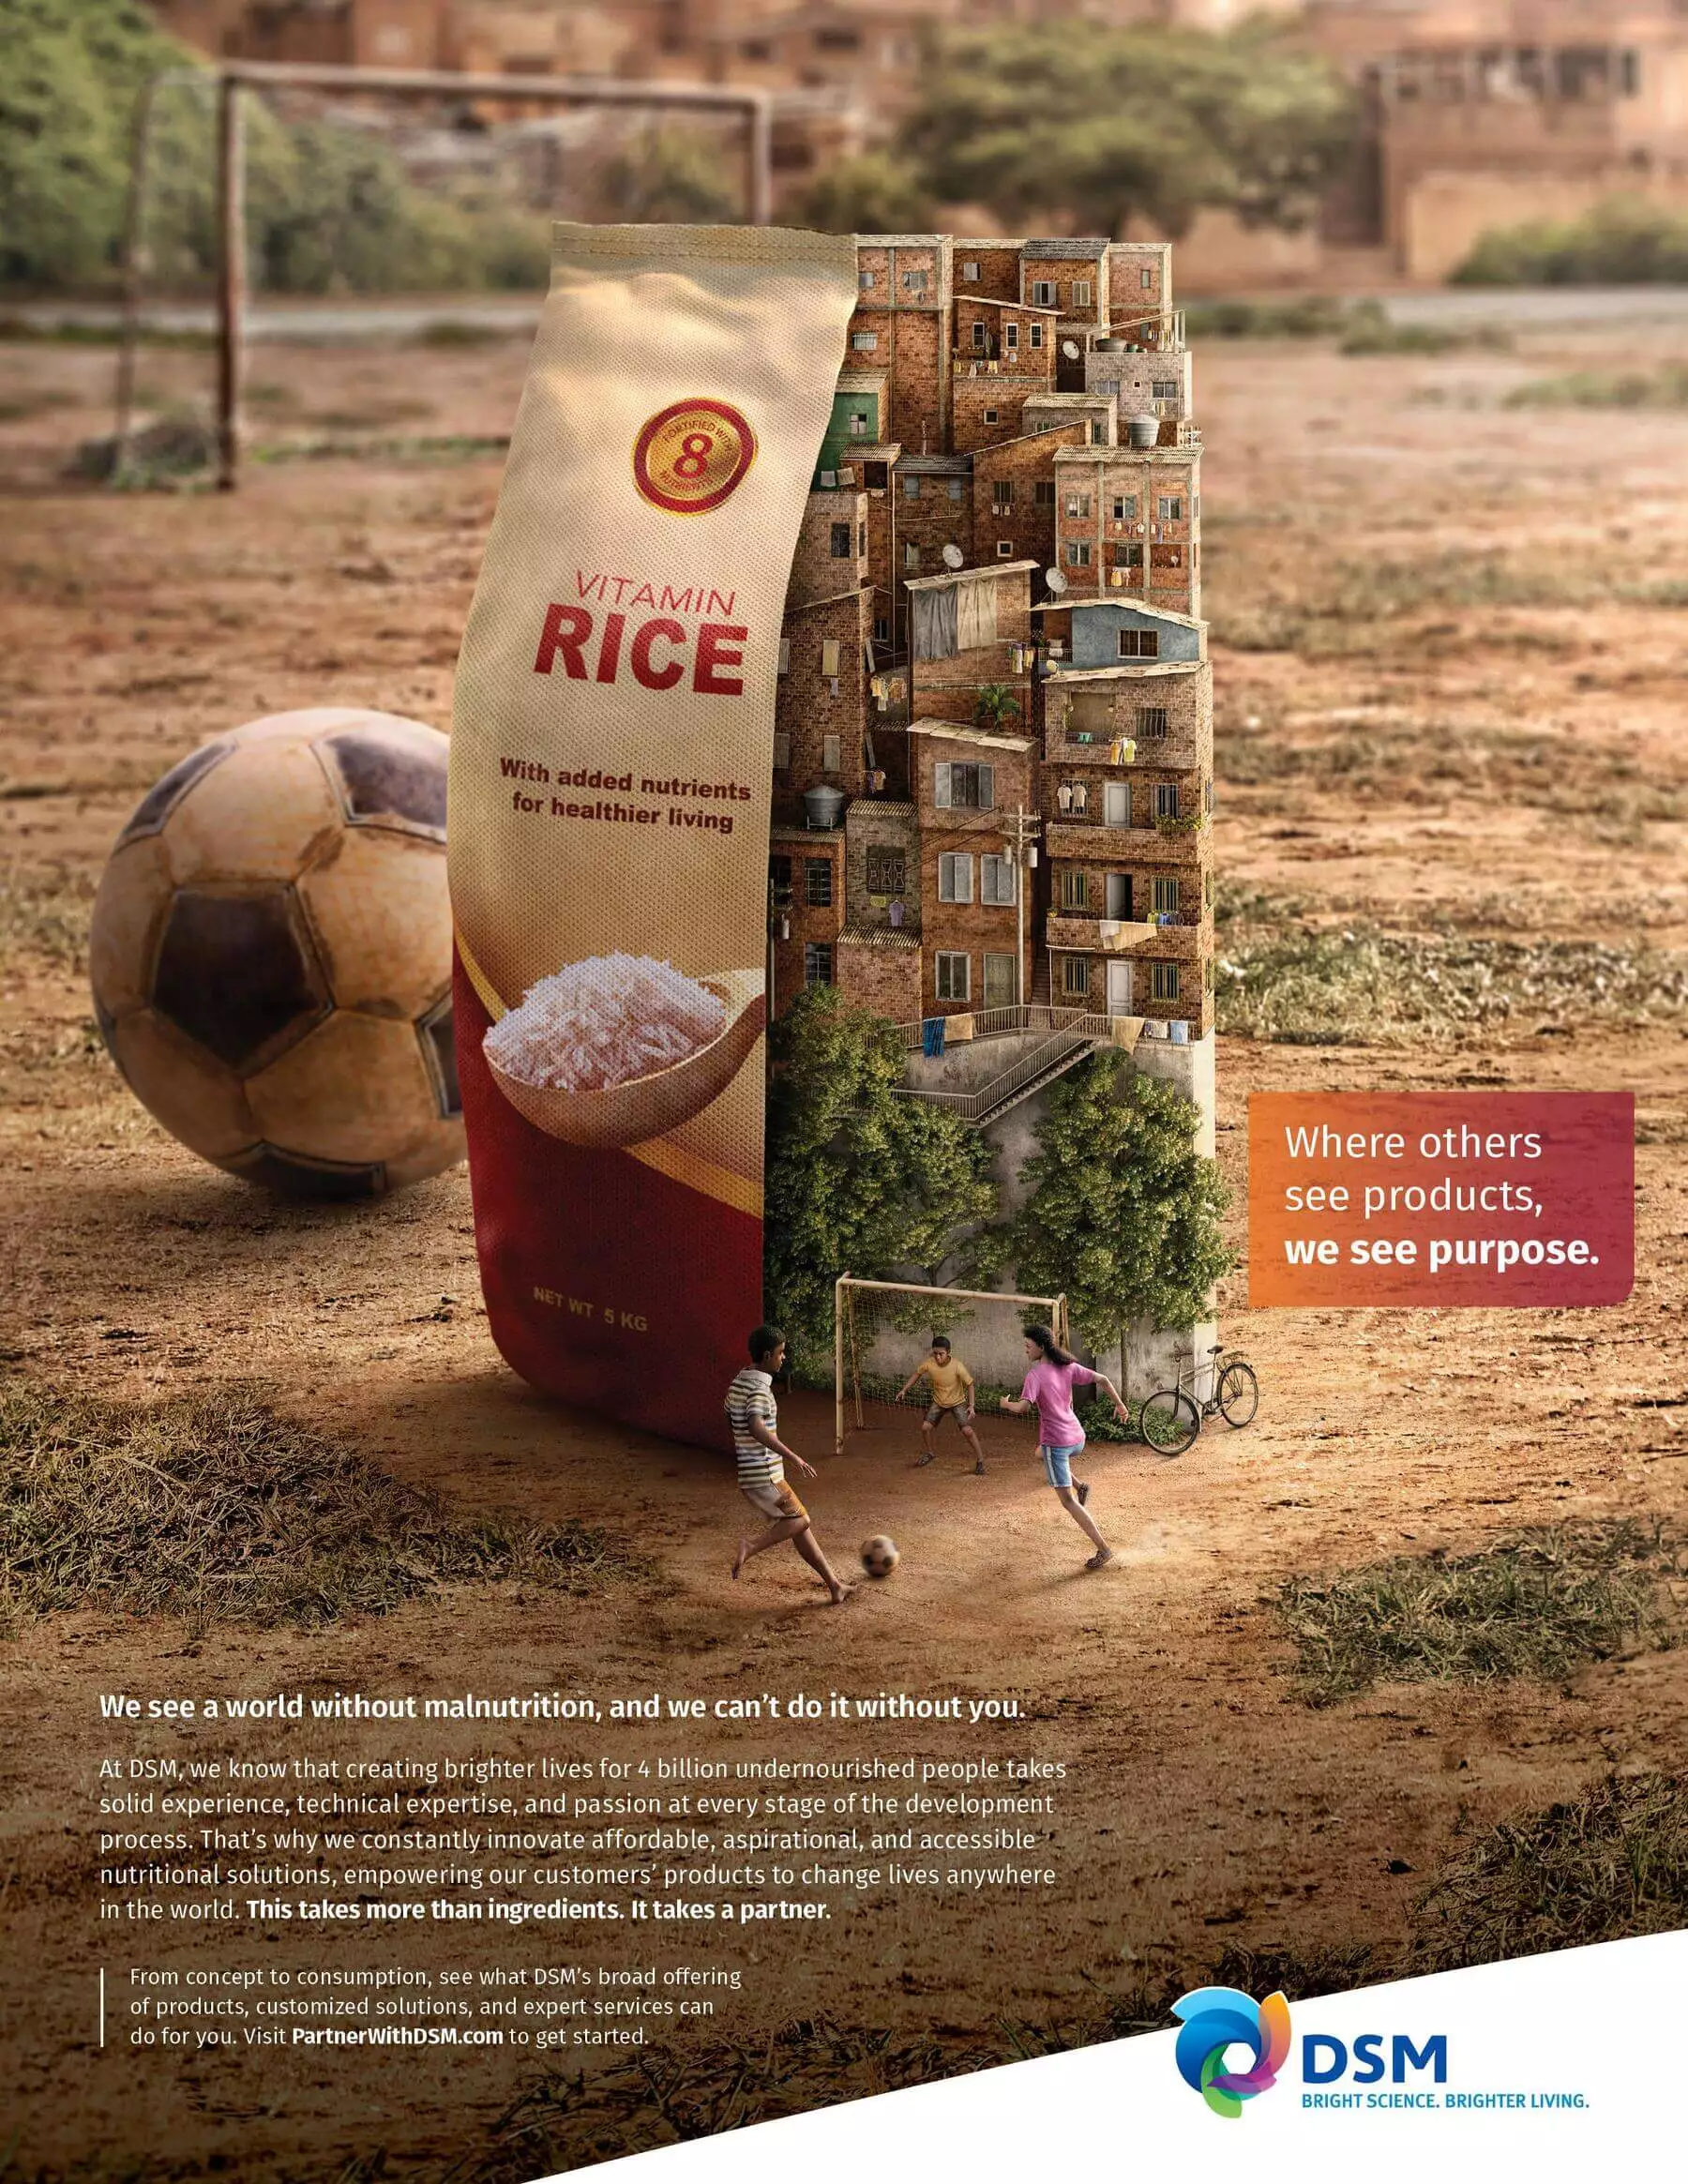 print advertising campaign